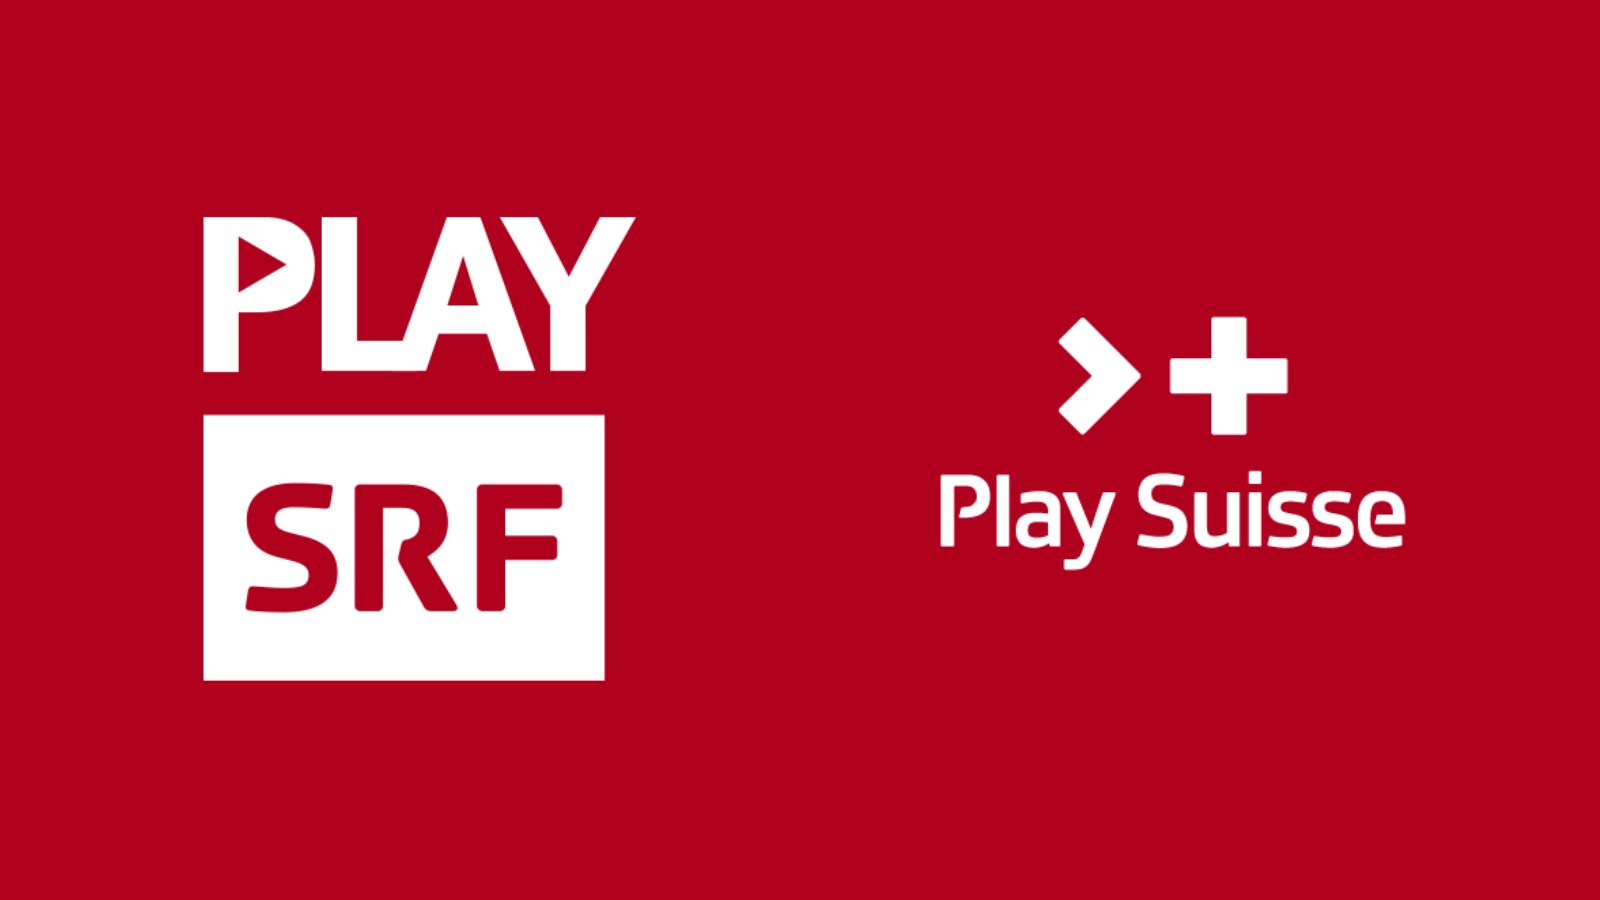 What is the difference between Play Suisse and Play SRF?